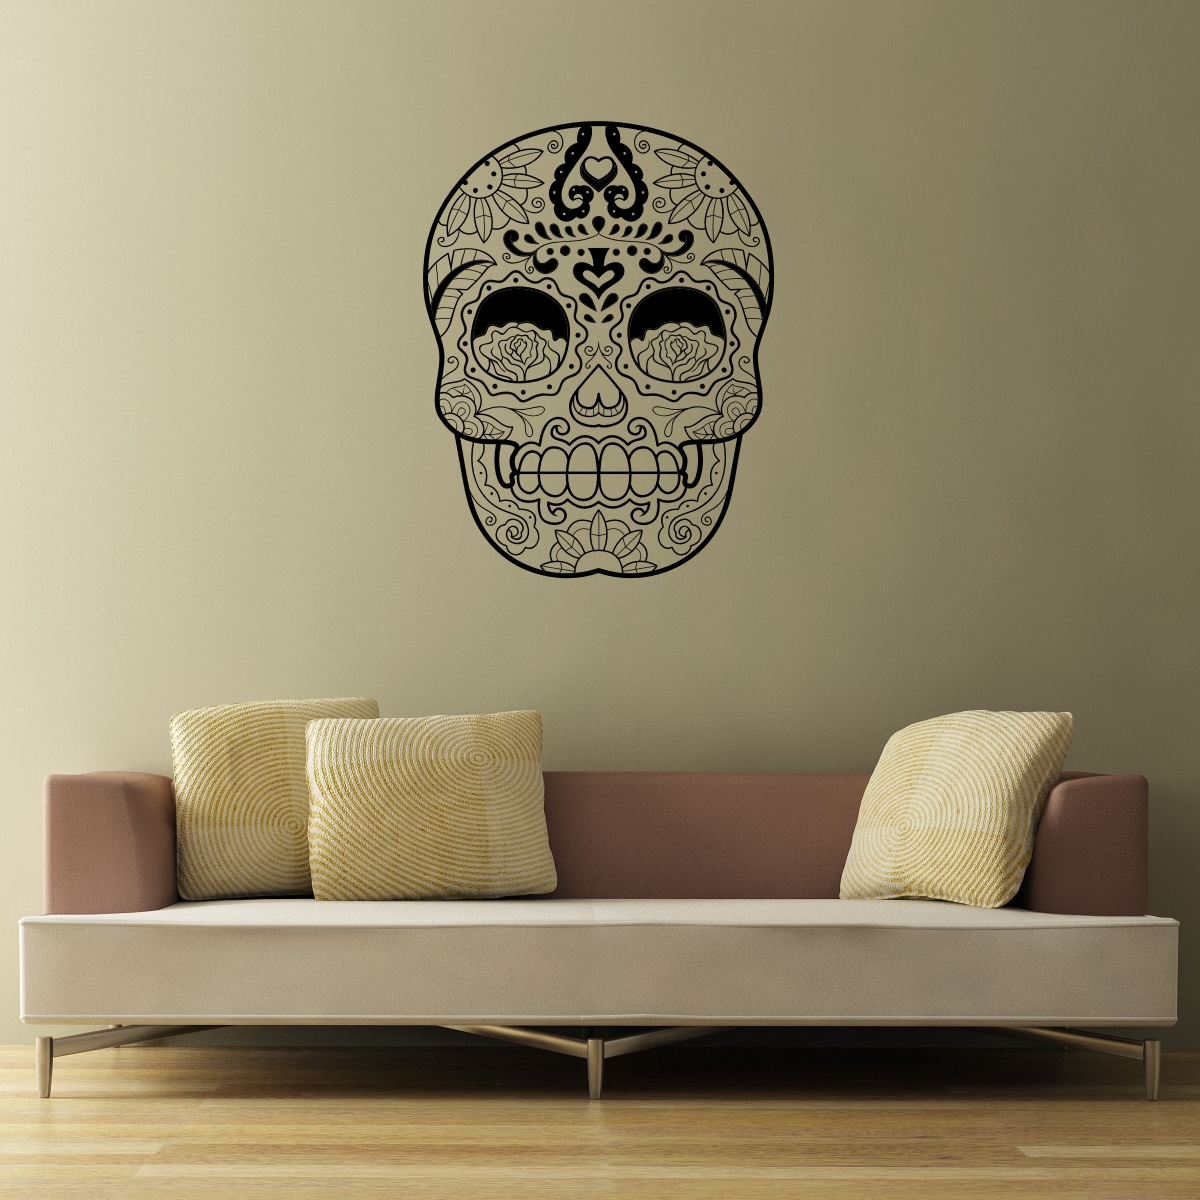 Sugar-Skull-Vinyl-Wall-Decal-For-Day-of-the-Dead-and-Halloween-Decorating-300x300